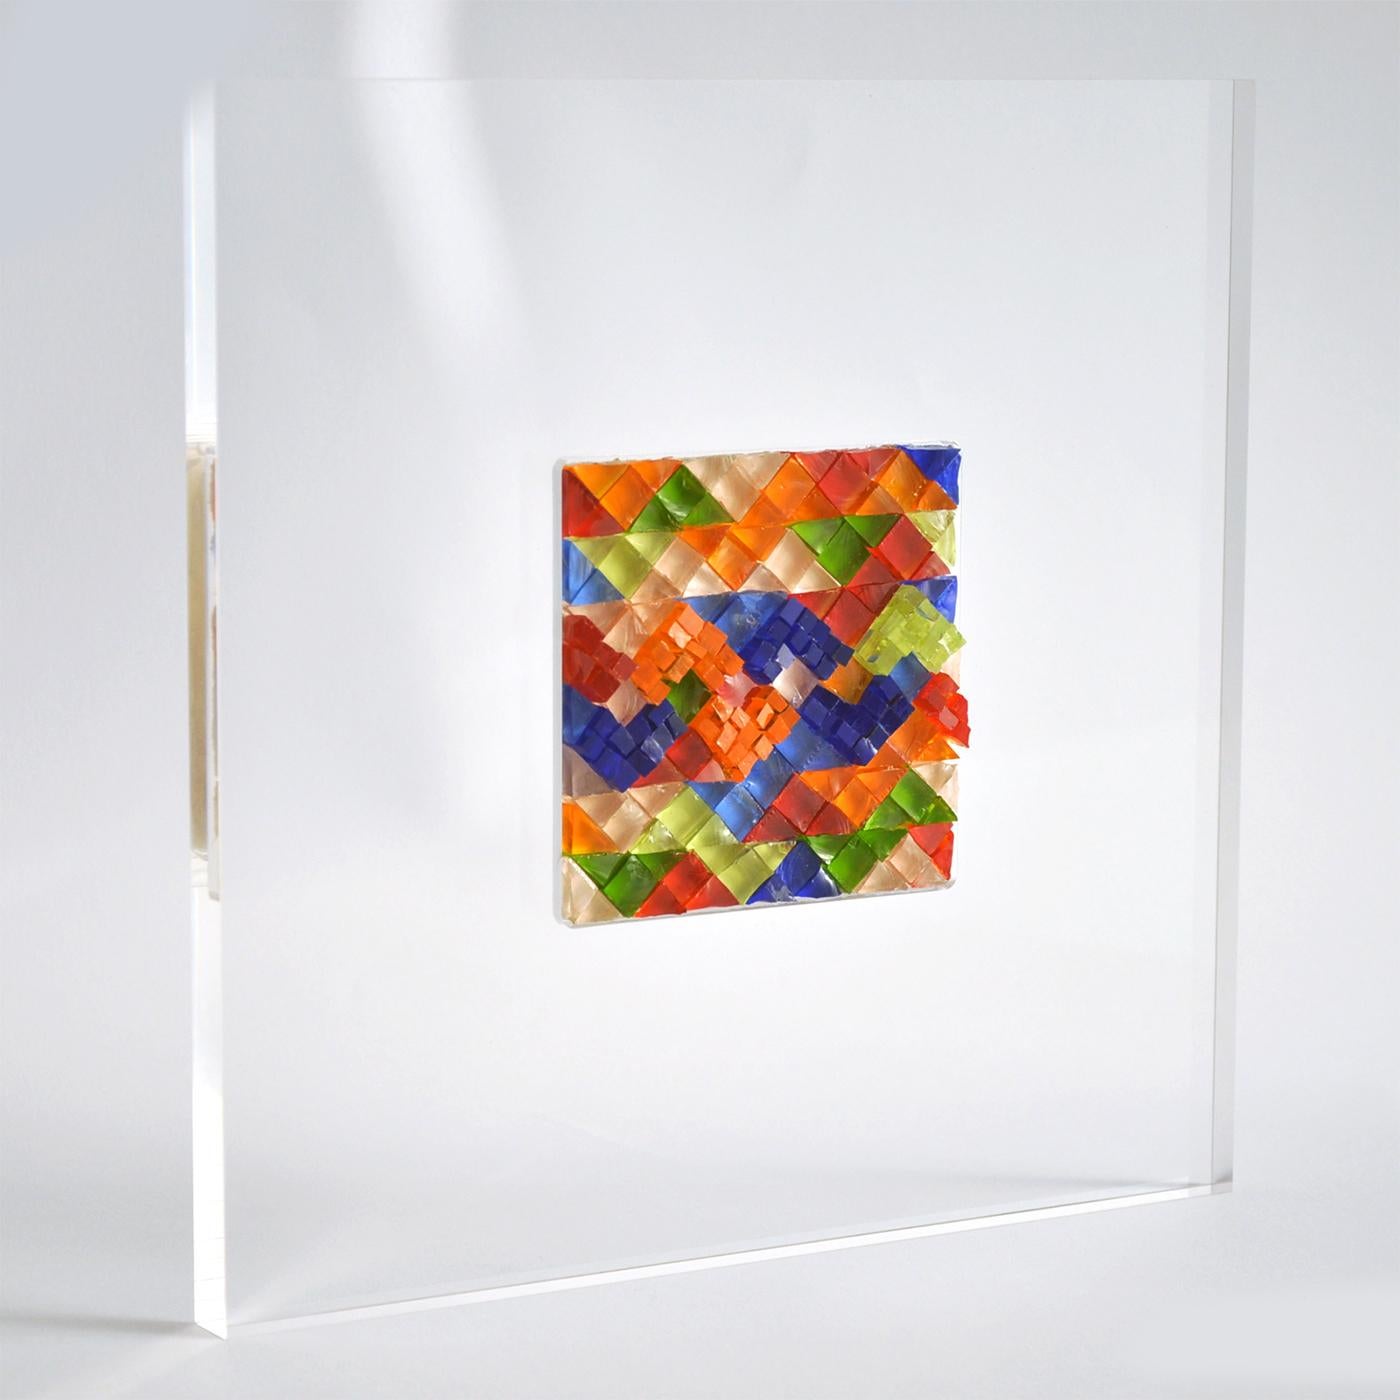 Artist Nino Basso decided to create a modern revisitation of the ancient splendour of Roman and Byzantine mosaic works in this contemporary mosaic tableau. The tableau’s white crystal acrylic frame is a clean backdrop for the Stark, bright colours